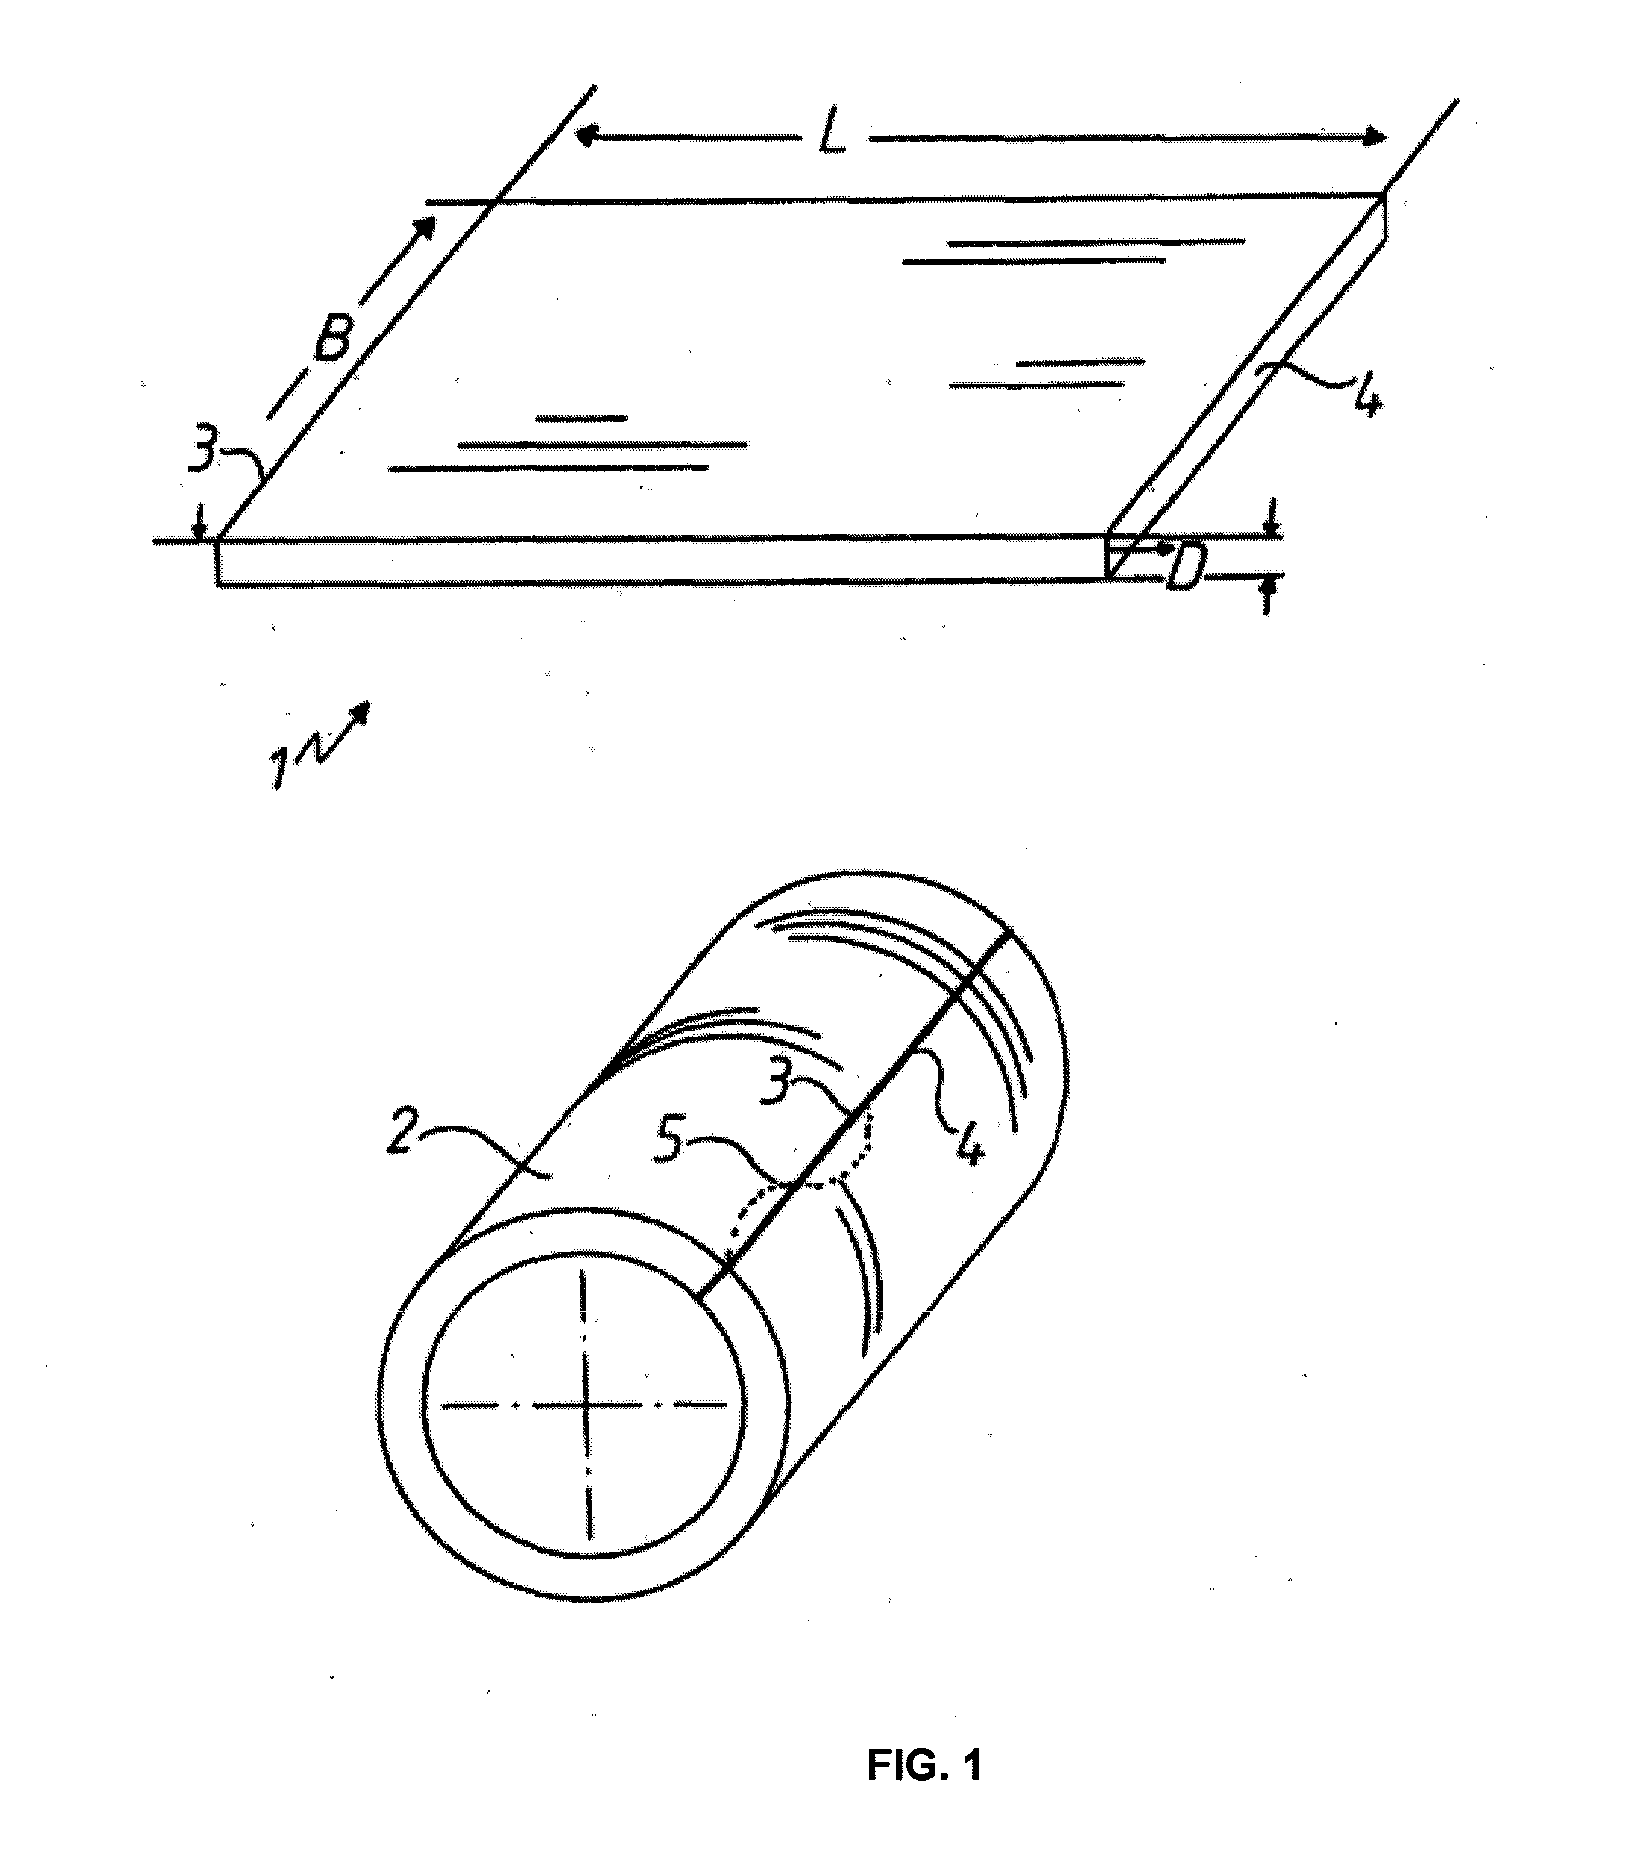 Method for producing metal elements, in particular sealing elements